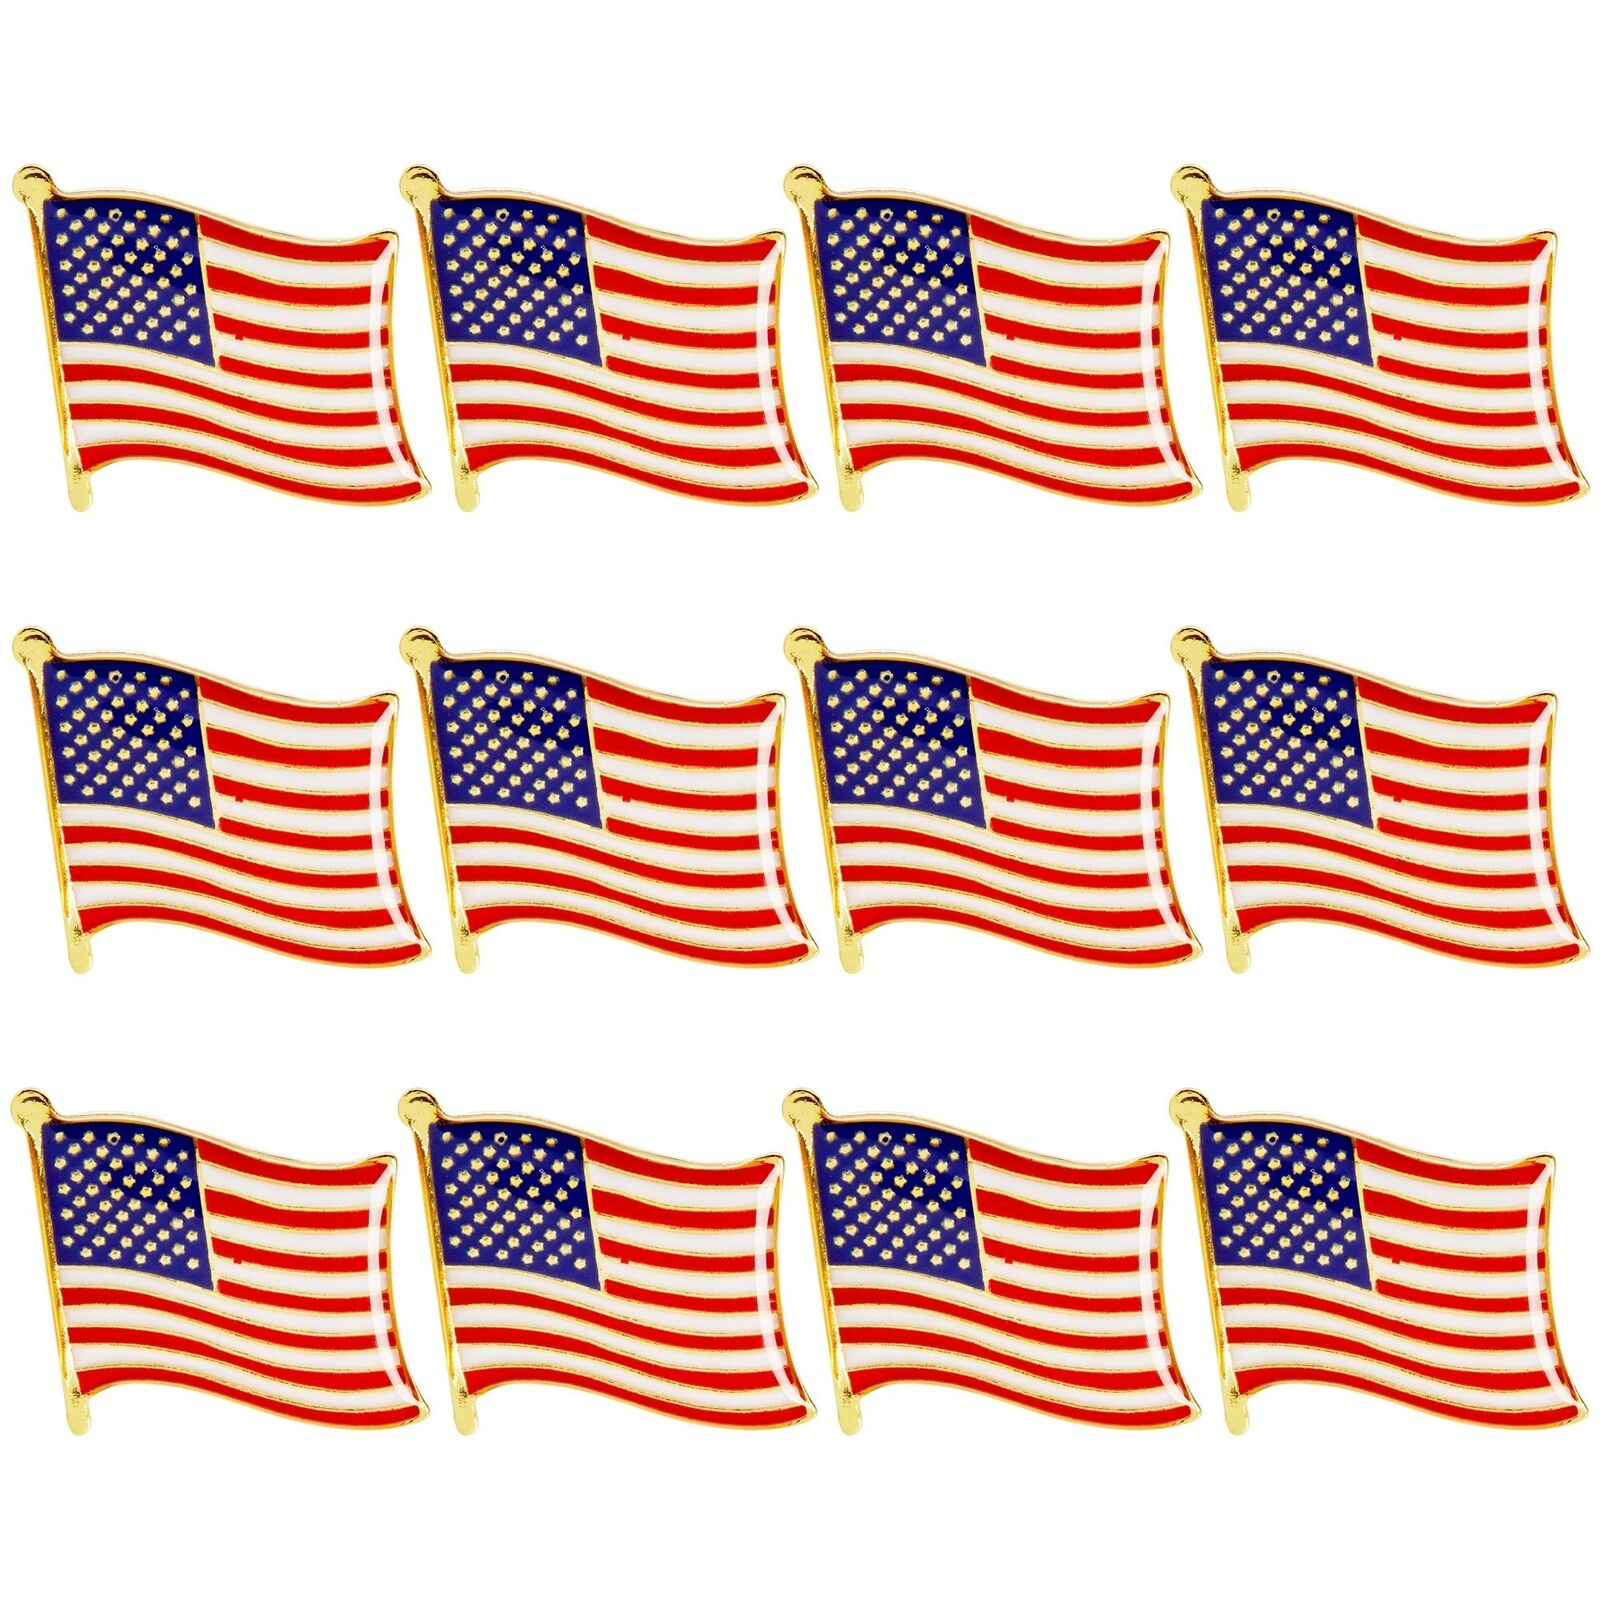 12-Pack American Flag Waving Lapel Pins, Patriotic US Flag Pins for National Day